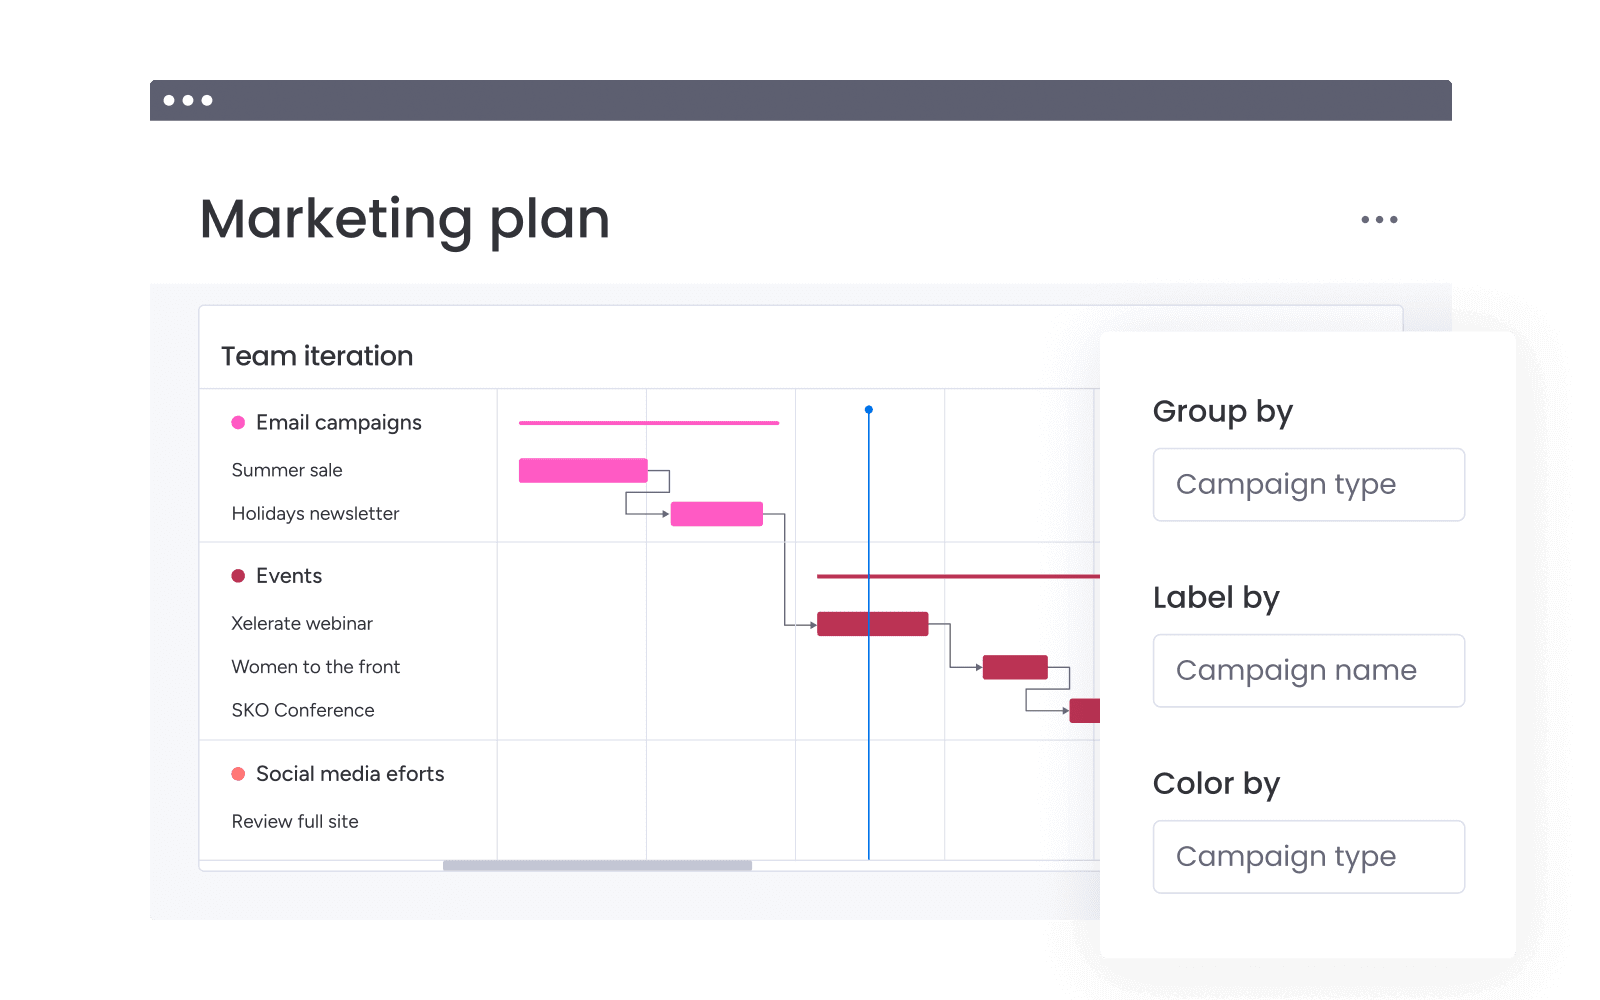 A snapshot of Monday.com's interface for managing marketing plans, showcasing a project board with categories such as email campaigns, summer sale, holidays newsletter, events, and social media efforts